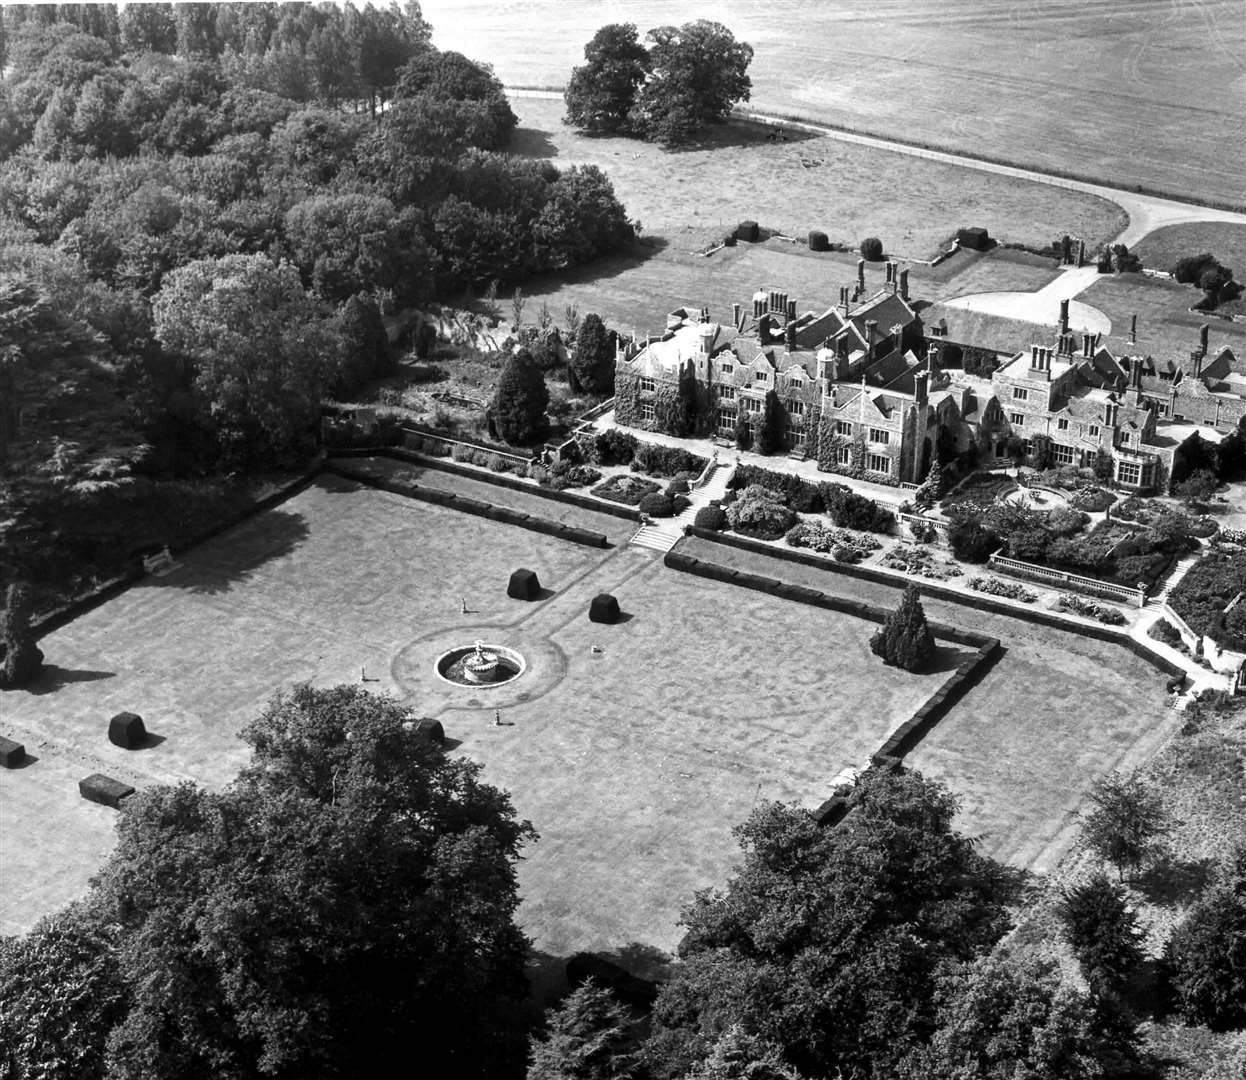 Eastwell Manor and its grounds pictured from above in 1976